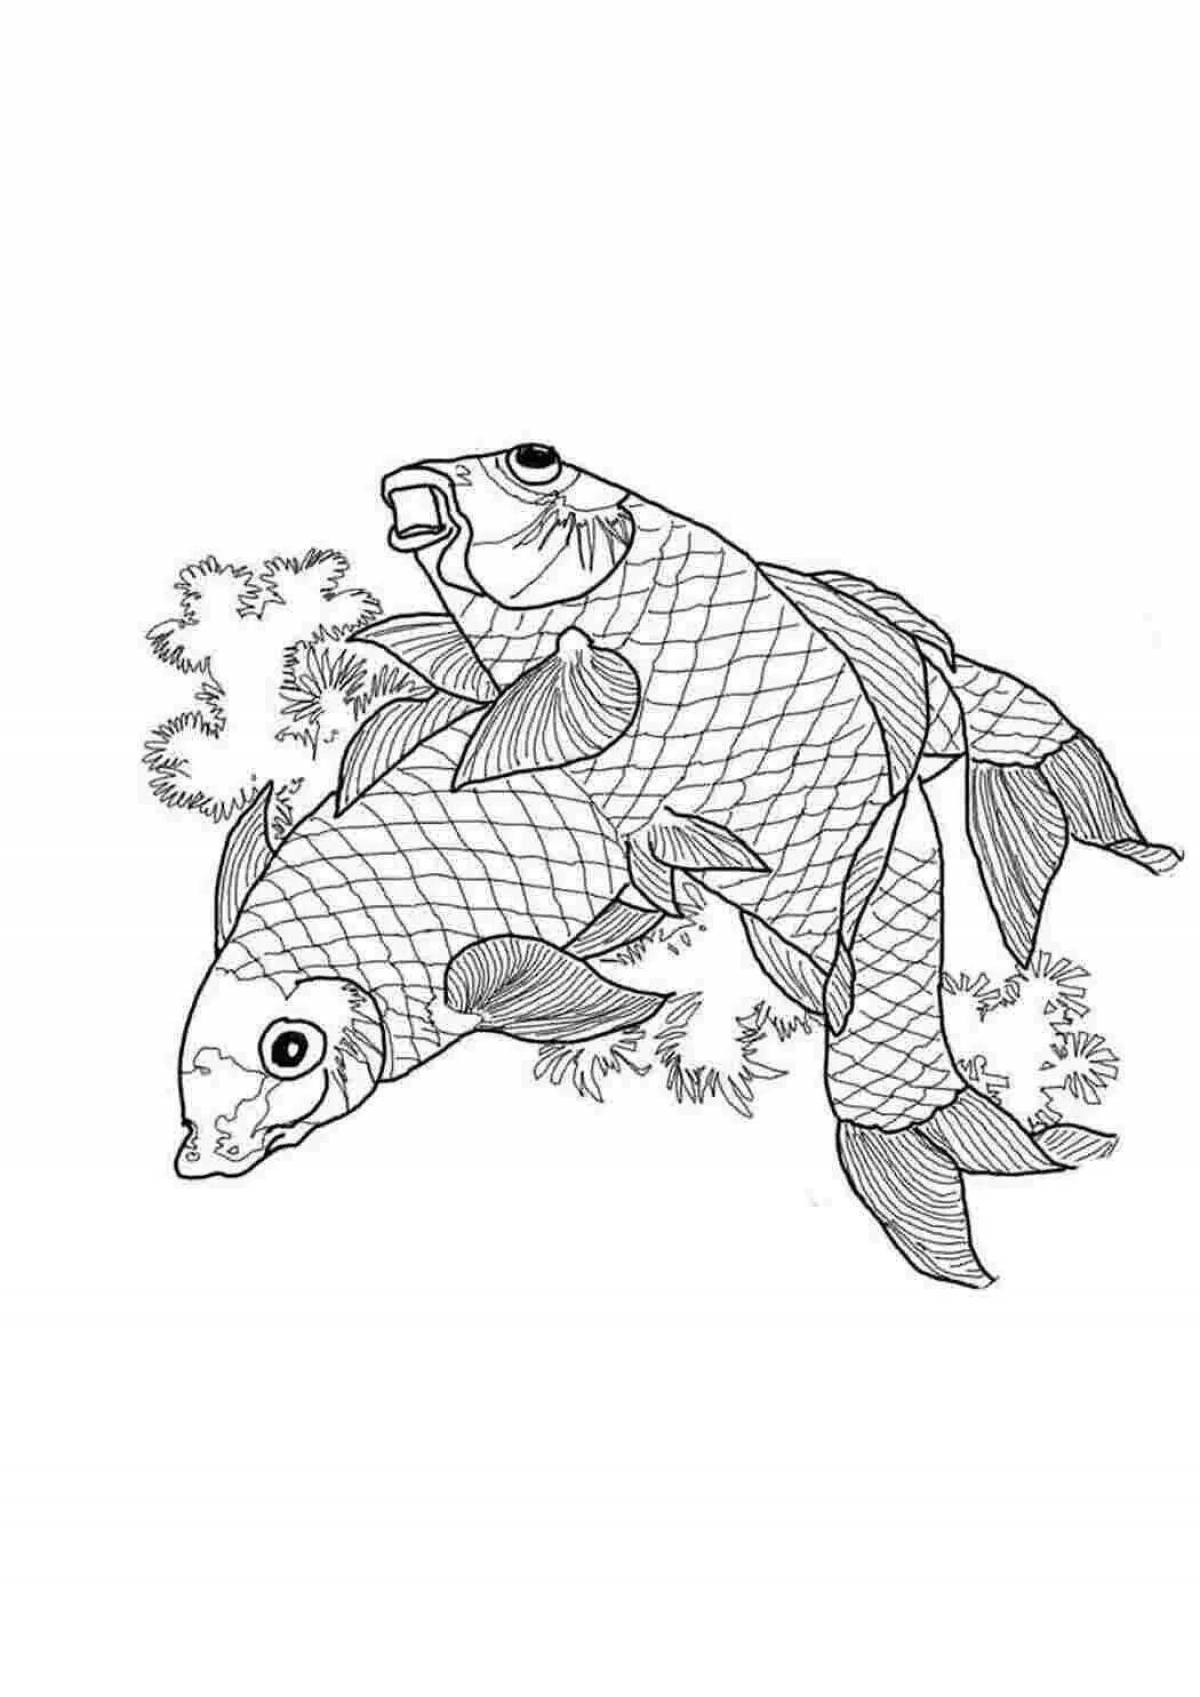 Adorable carp coloring book for kids